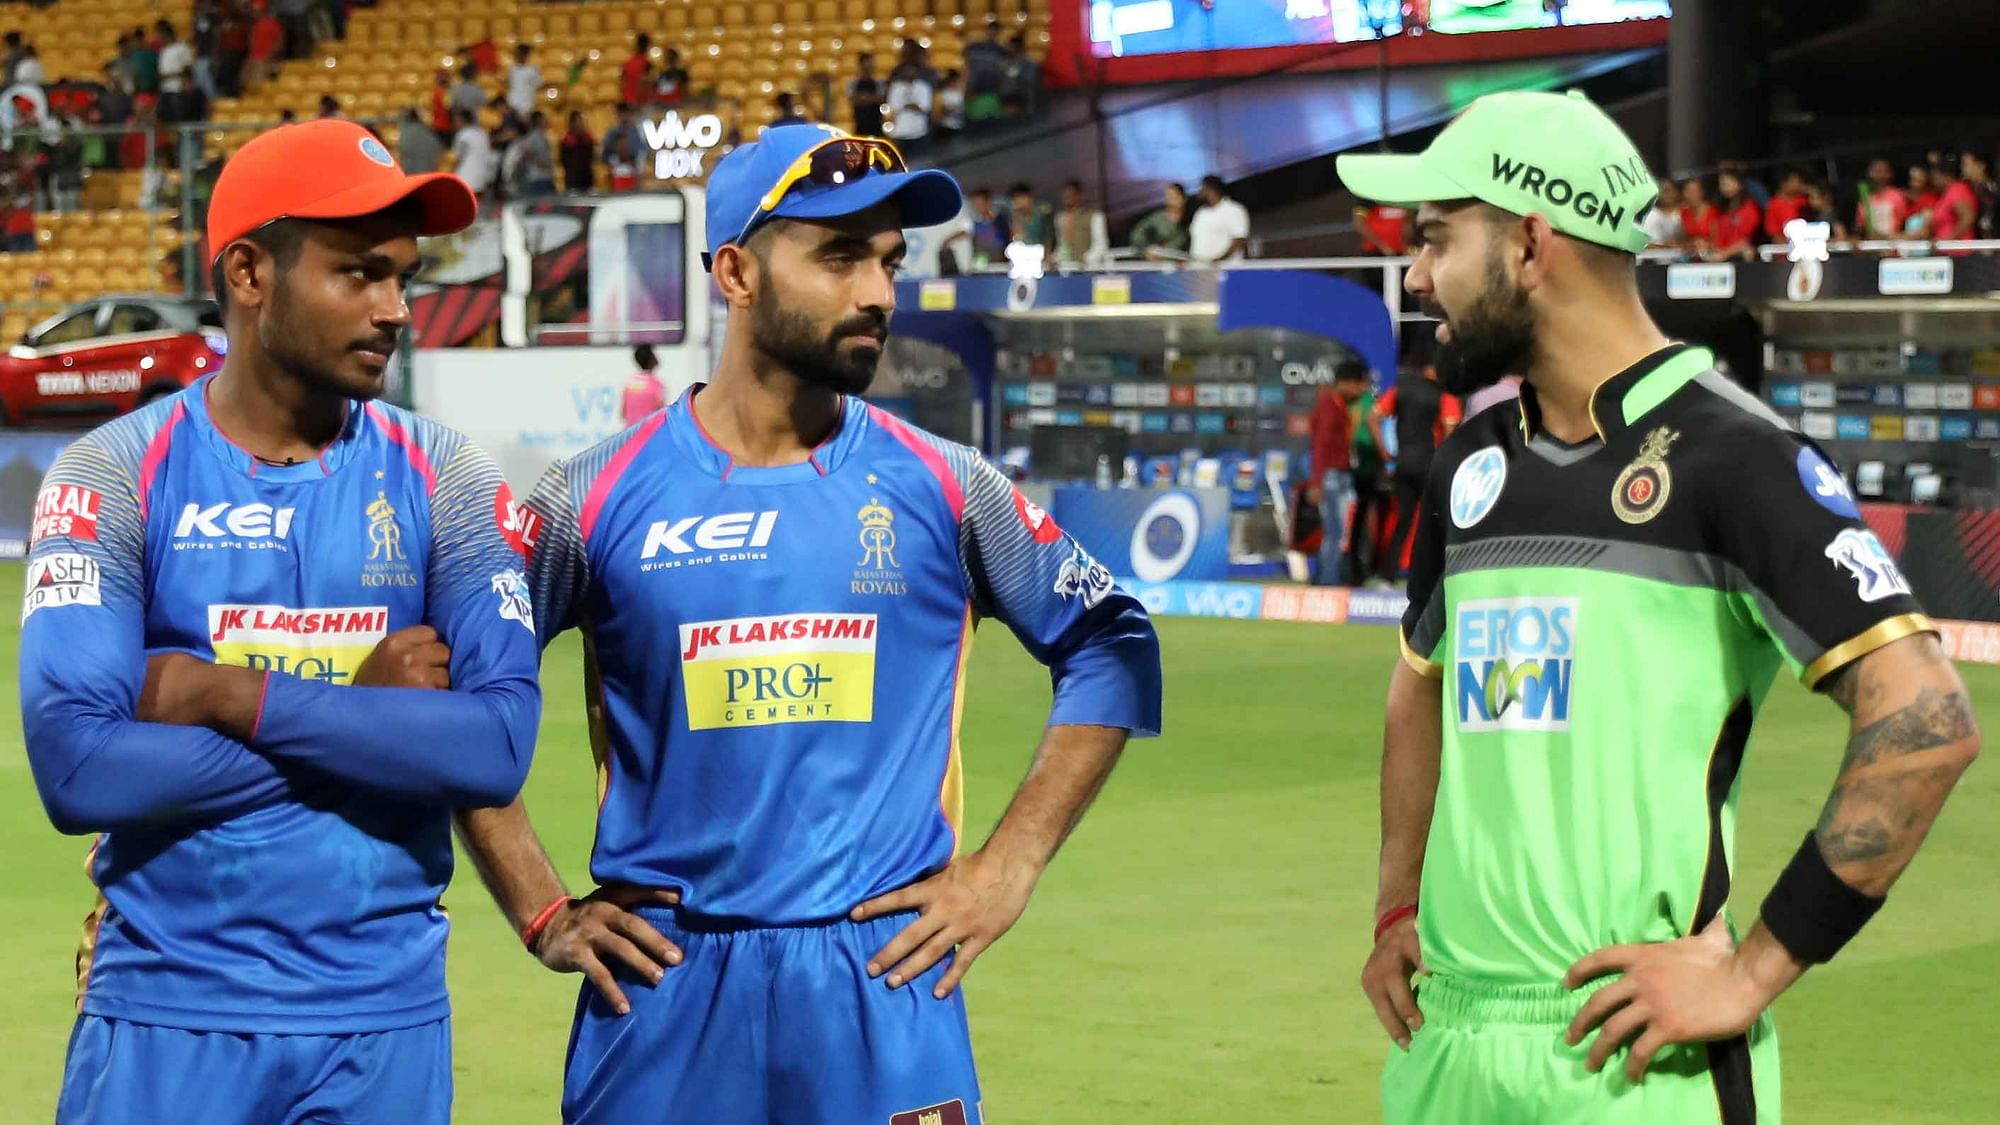 Sanju Samson of the Rajasthan Royals ,Ajinkya Rahane captain of the Rajasthan Royals and Virat Kohli captain of the Royal Challengers Bangalore during the presentation of the match eleven of the Vivo Indian Premier League 2018 (IPL 2018) between the Royal Challengers Bangalore and the Rajasthan Royals held at the M. Chinnaswamy Stadium in Bangalore on the 15th April 2018.